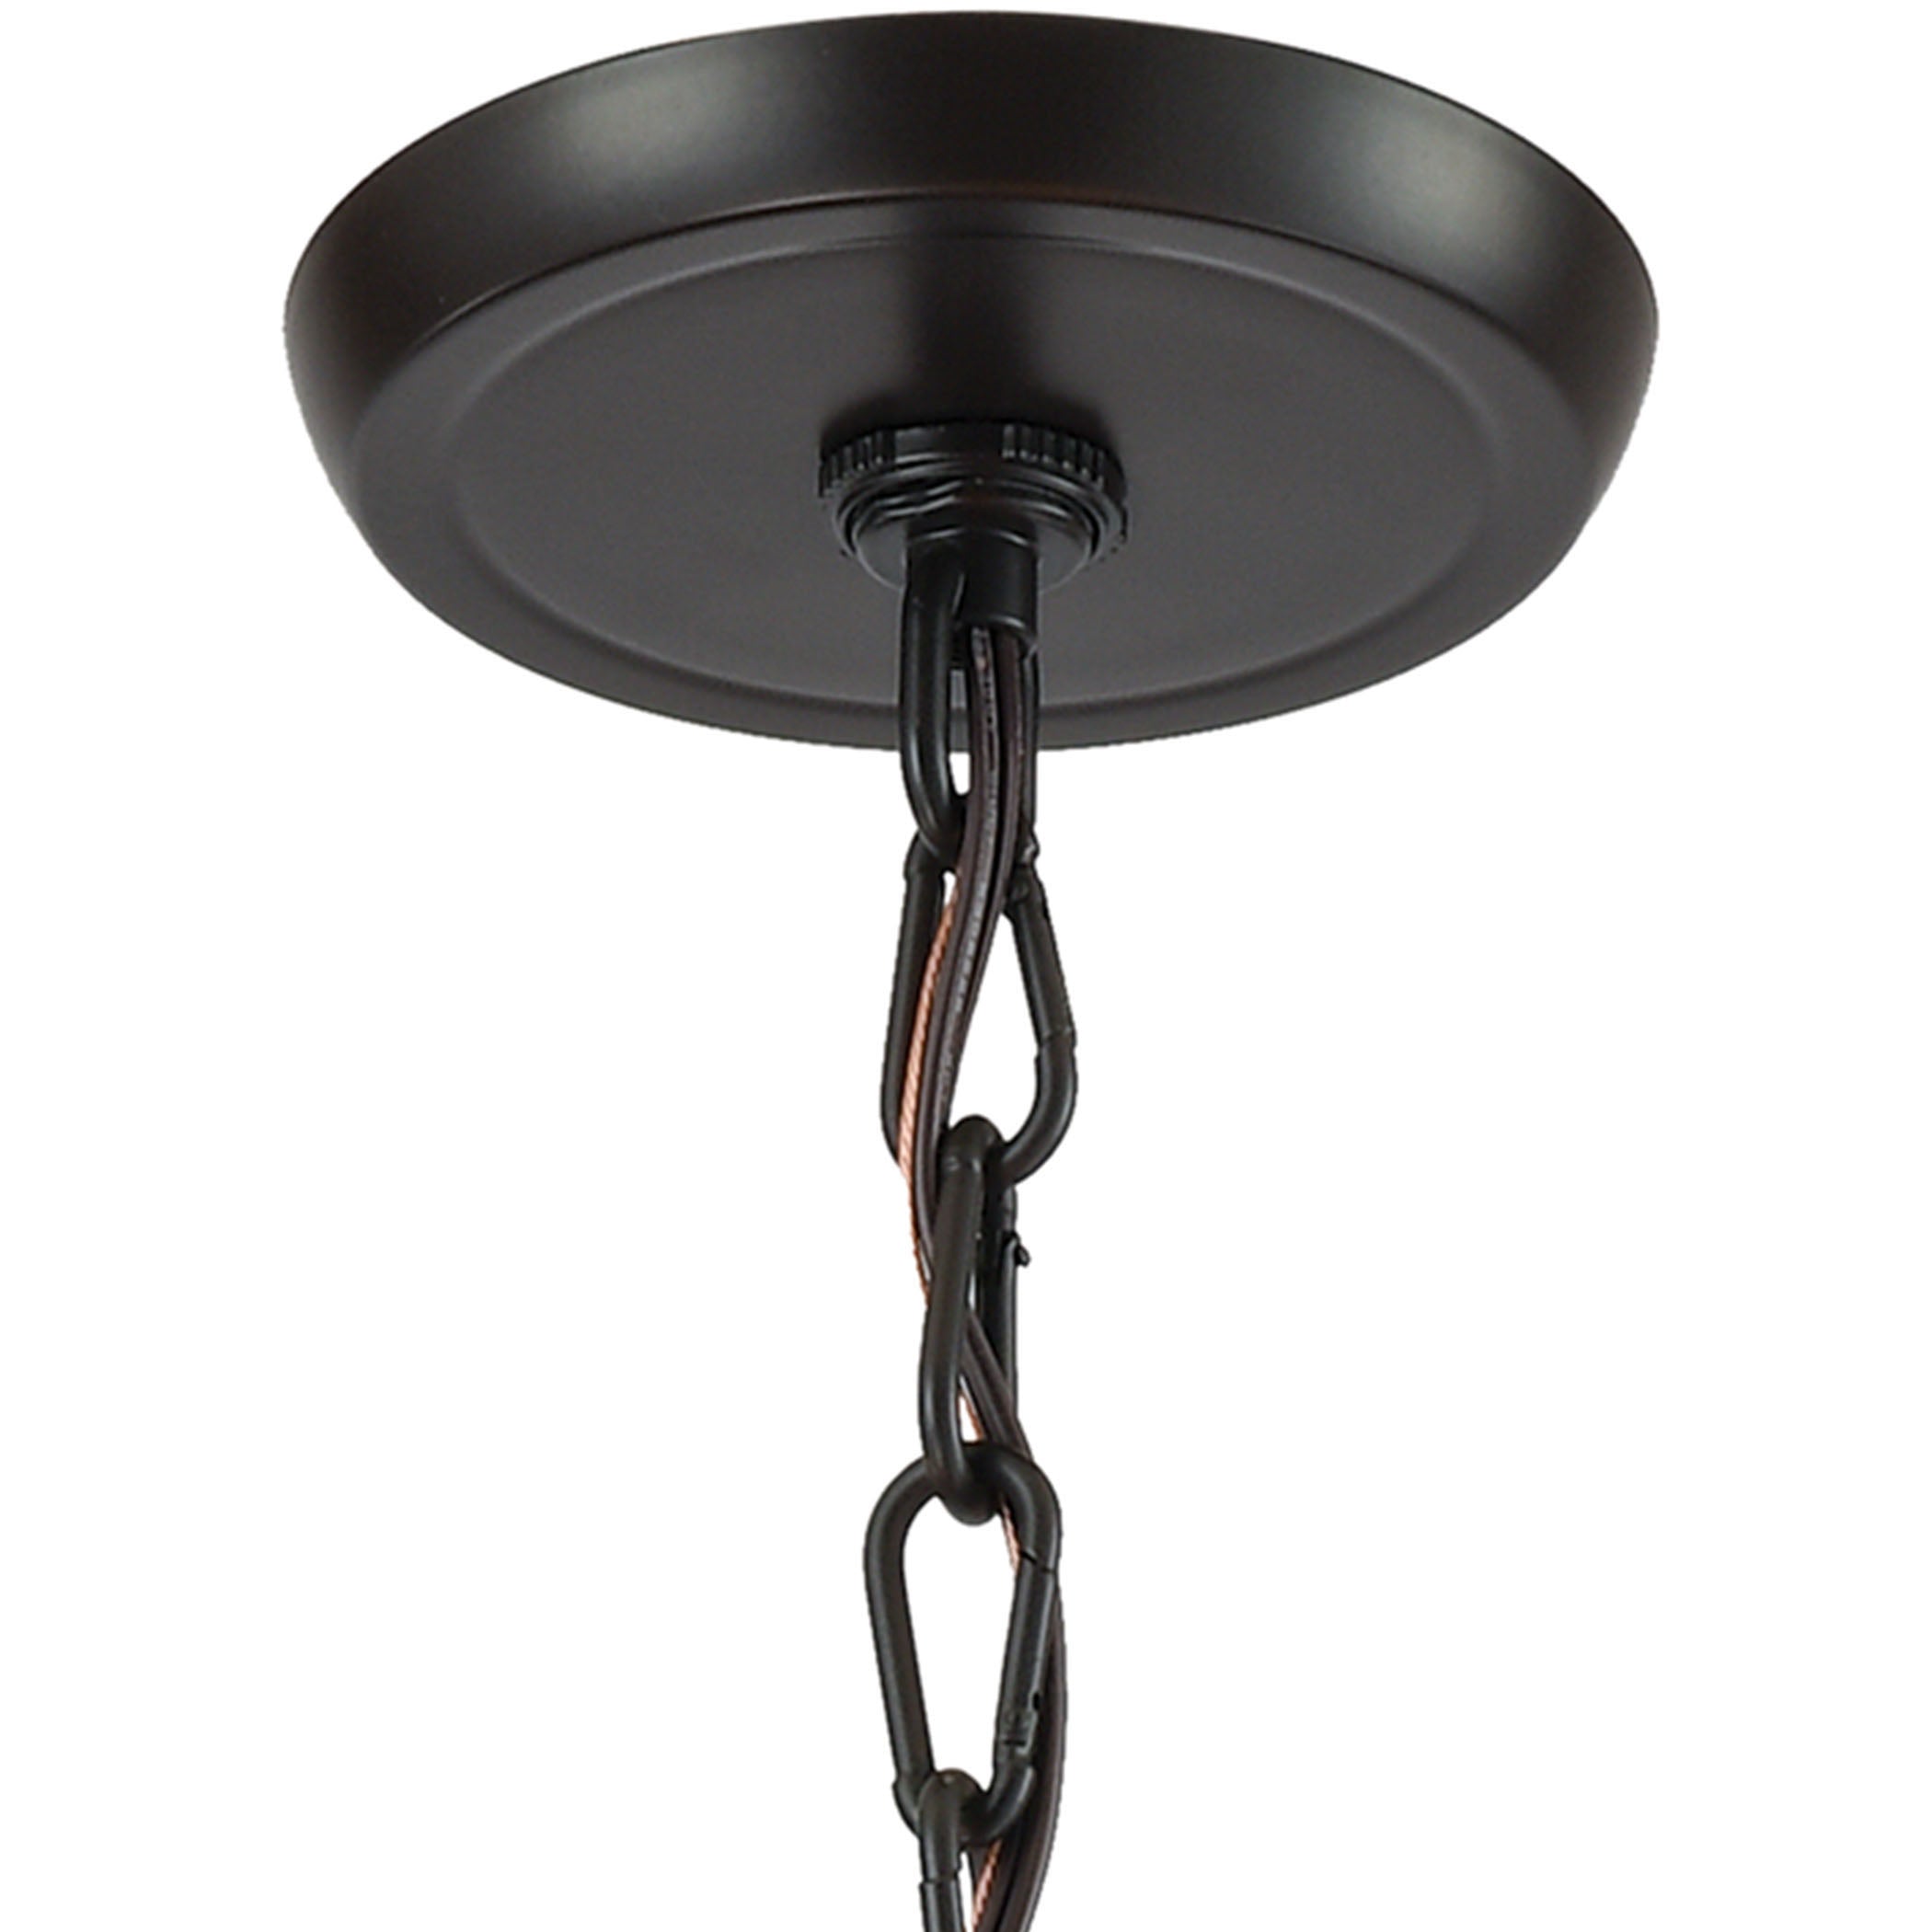 ELK Lighting 10711/3 Weaverton 3-Light Chandelier in Oiled Bronze with Natural Rope-wrapped Shade